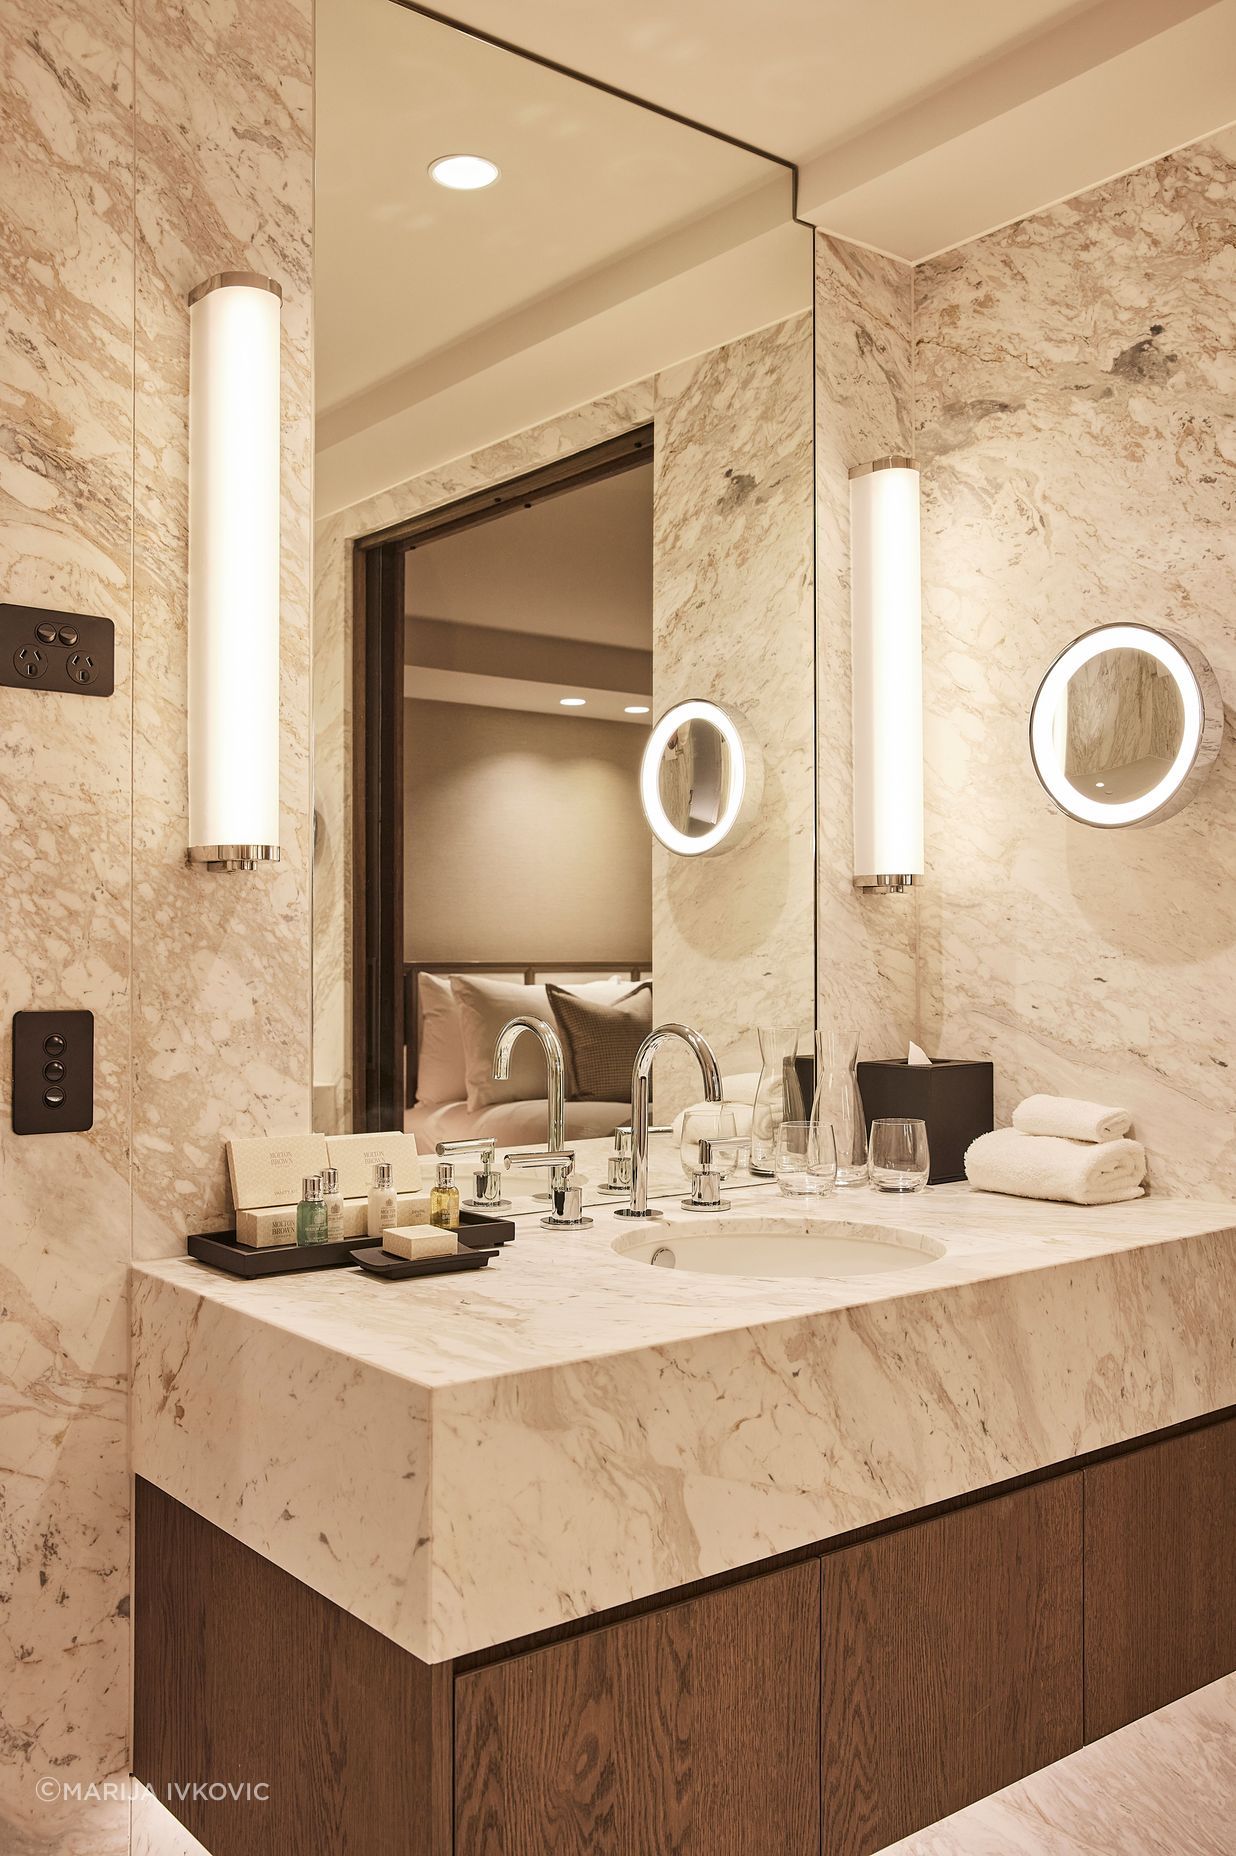 The hotel's rooms' ensuites are palatial in size and feature soft marble, contrasted against rich oak veneer.